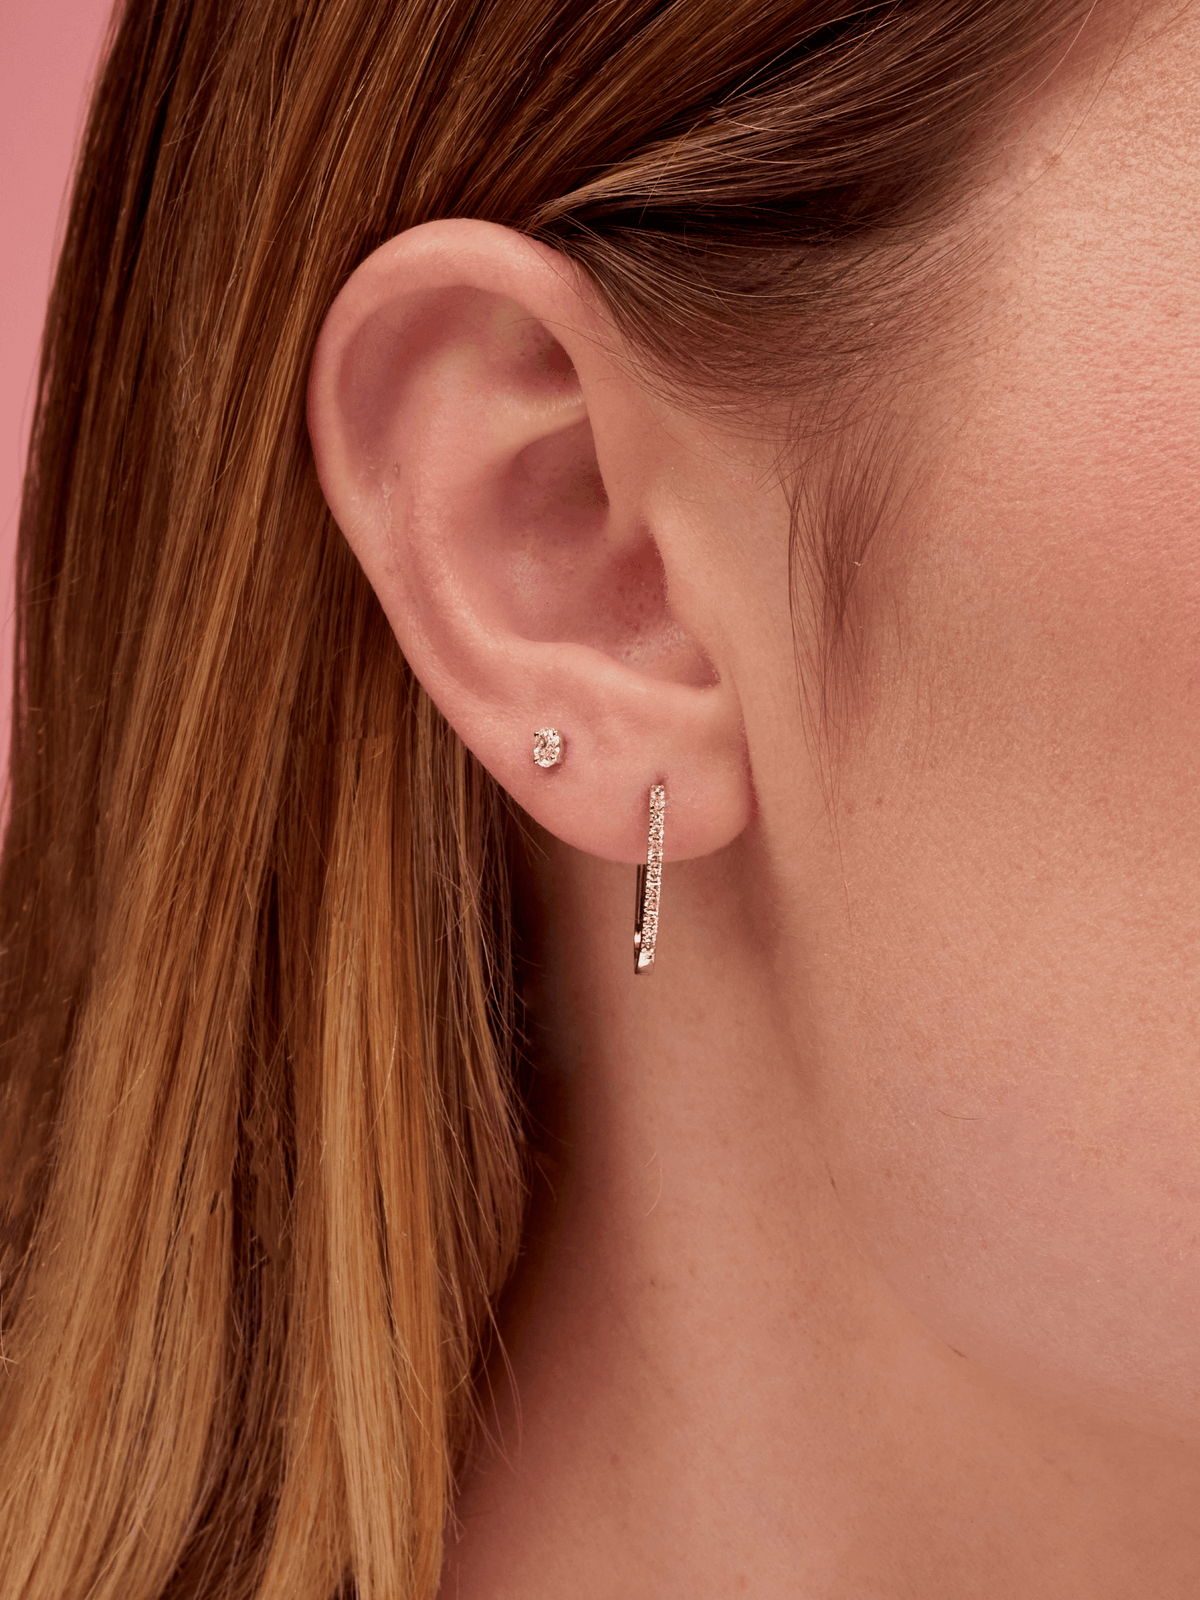 Diamond Paperclip Earring in White Gold on Ear in First Hole of Ear and Small Oval Diamond Stud in Second Hole